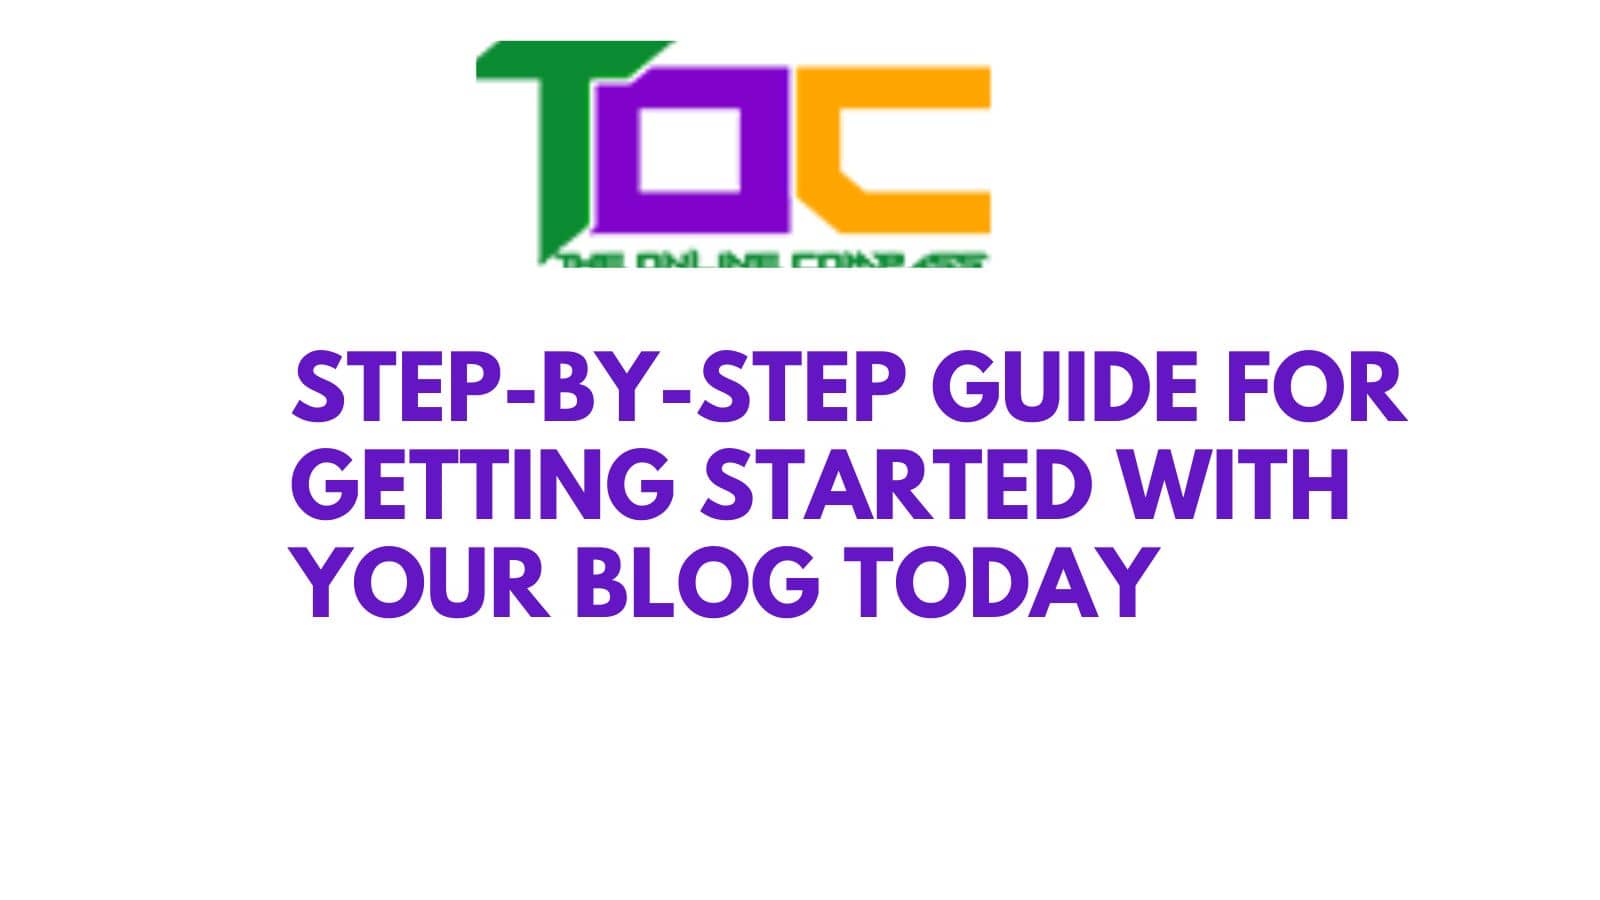 Step by step guide for getting started with your blog today